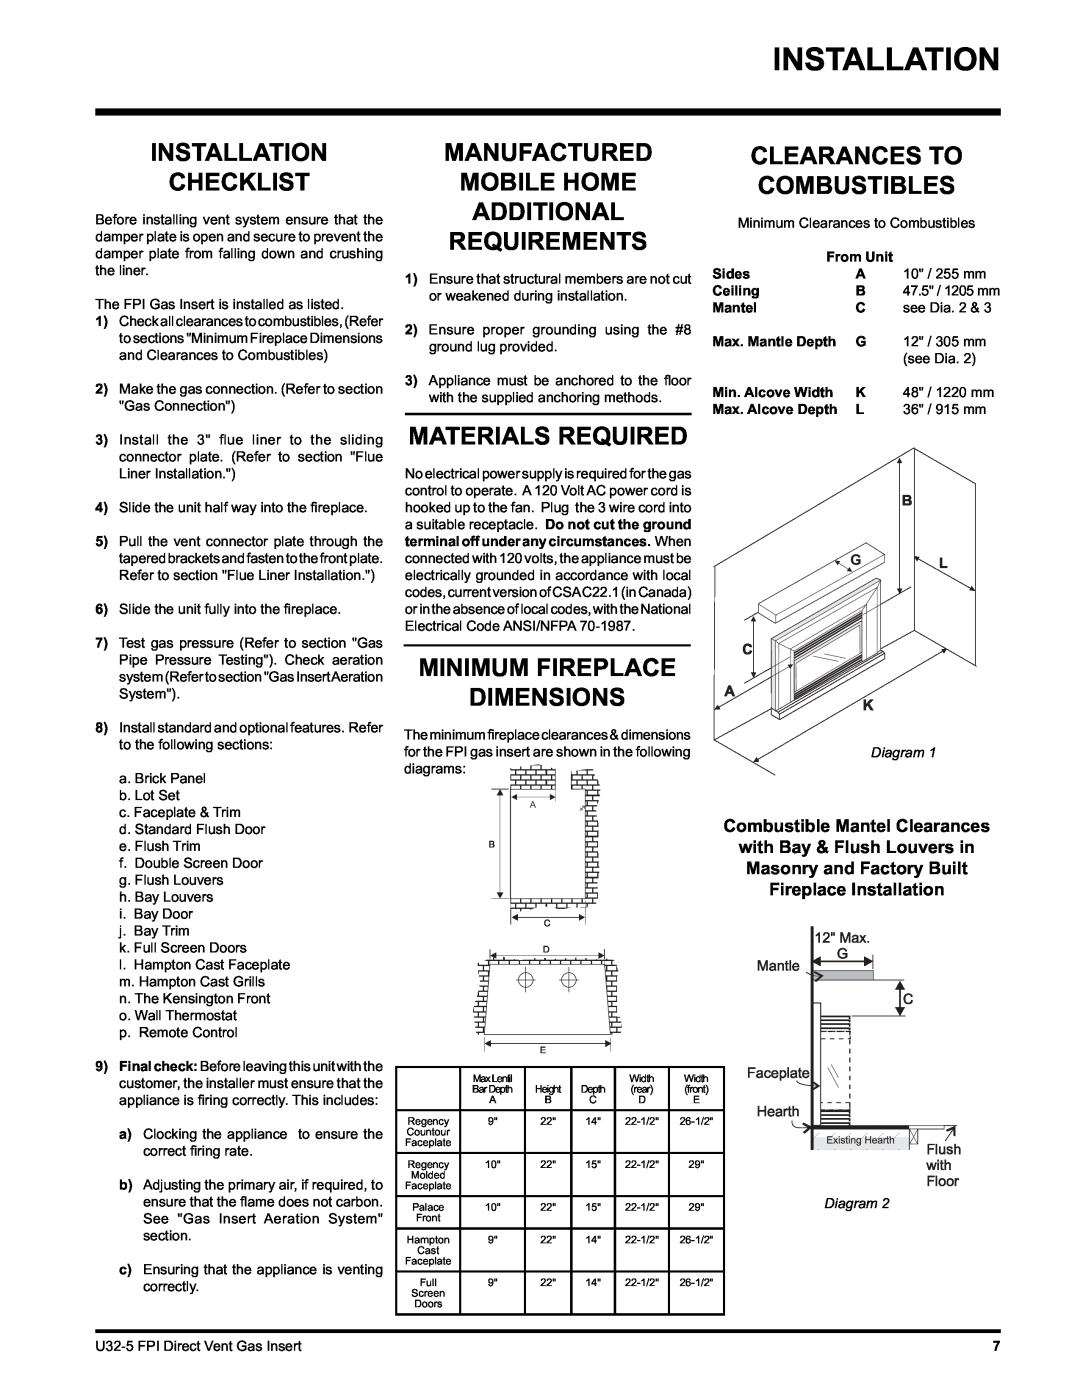 Hampton Direct U32 Installation Checklist, Manufactured Mobile Home Additional Requirements, Materials Required, Sides 